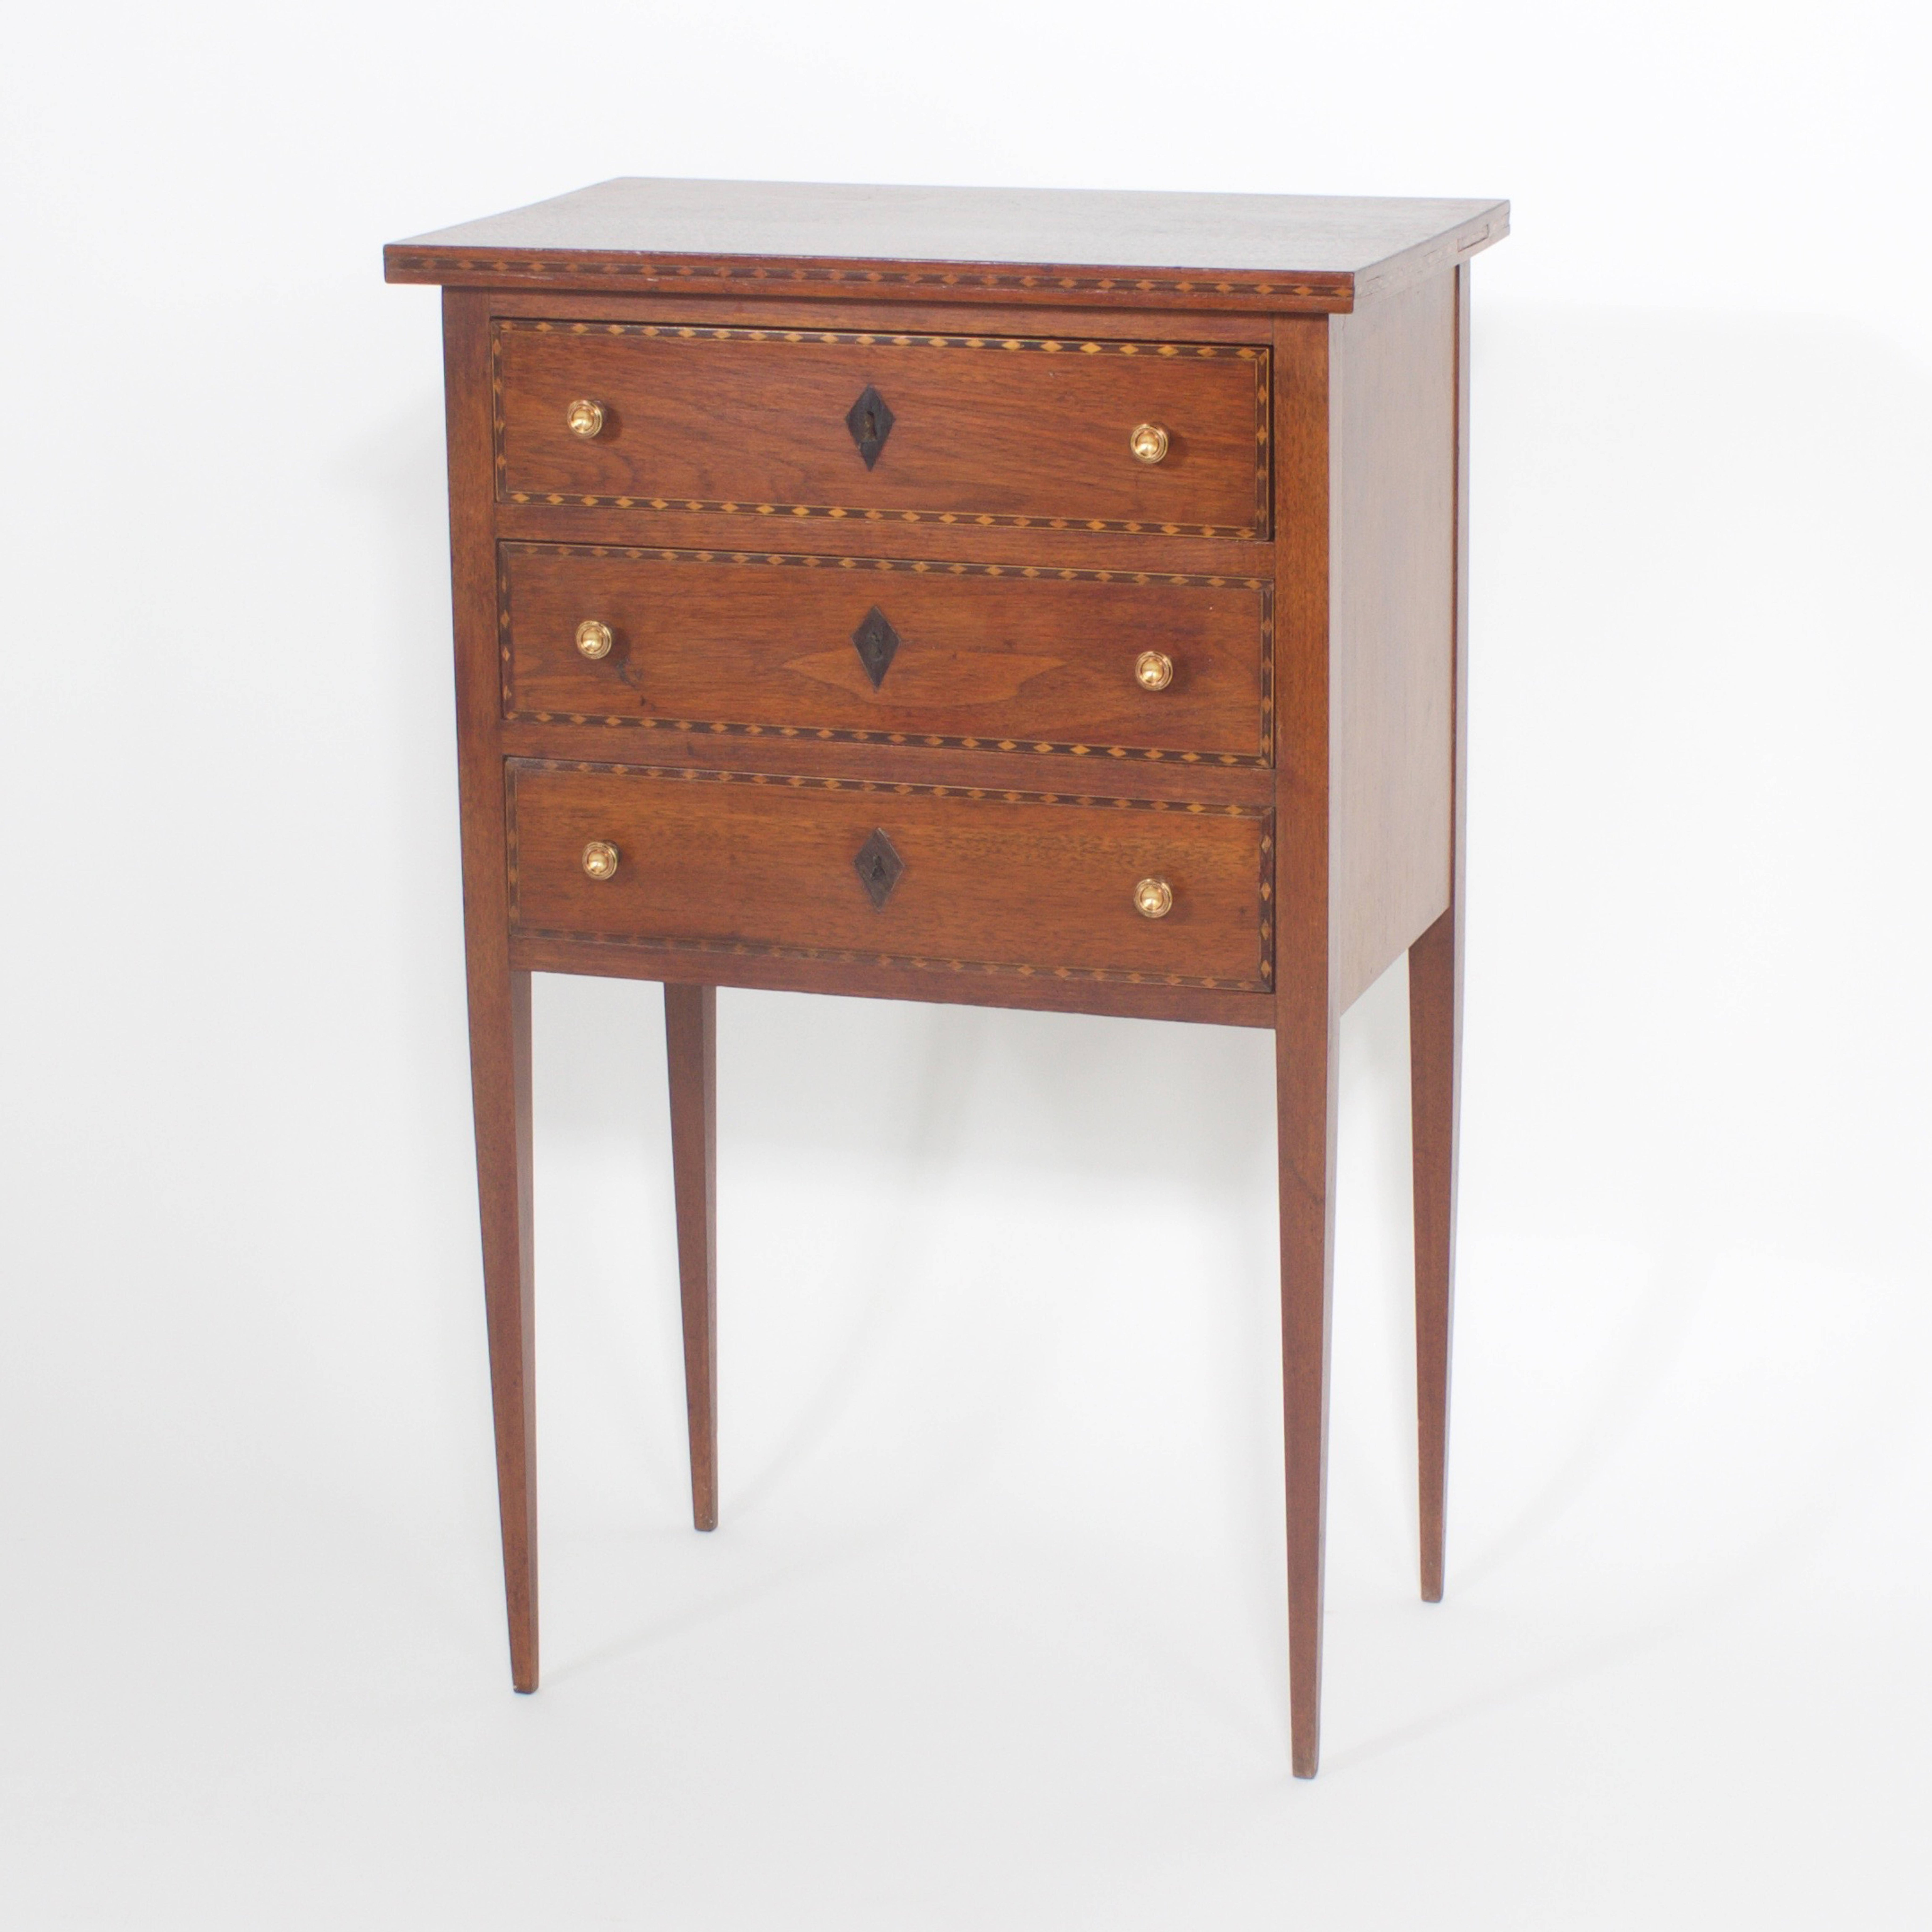 20th Century Pair of Mahogany Edwardian Three-Drawer Tables or Nightstands